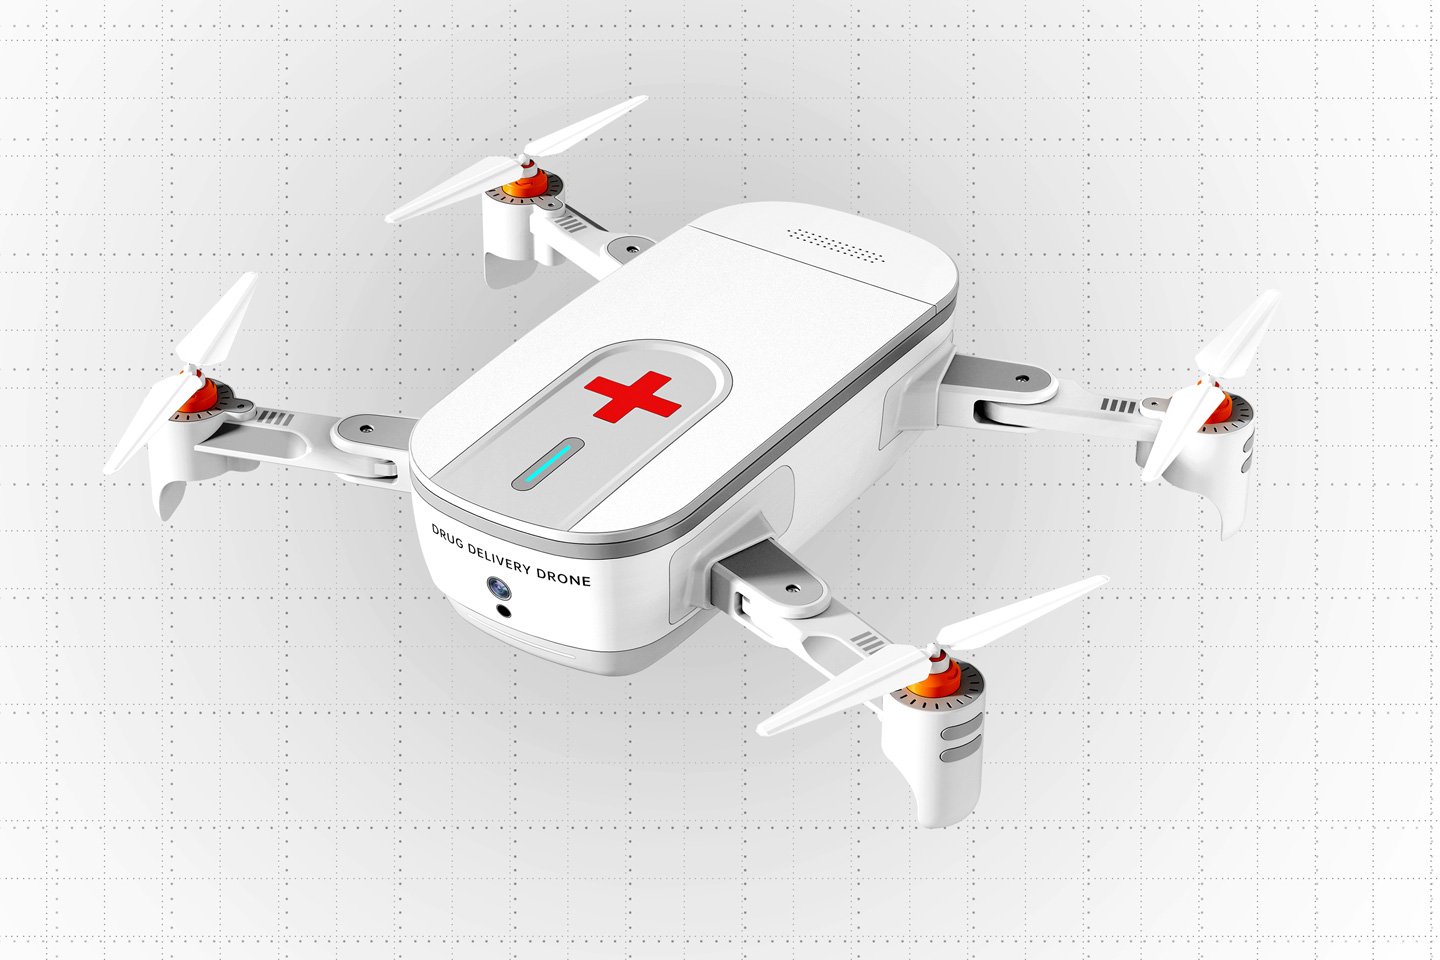 #Medical delivery drone ensures that life-saving drugs easily reach people affected by quarantines